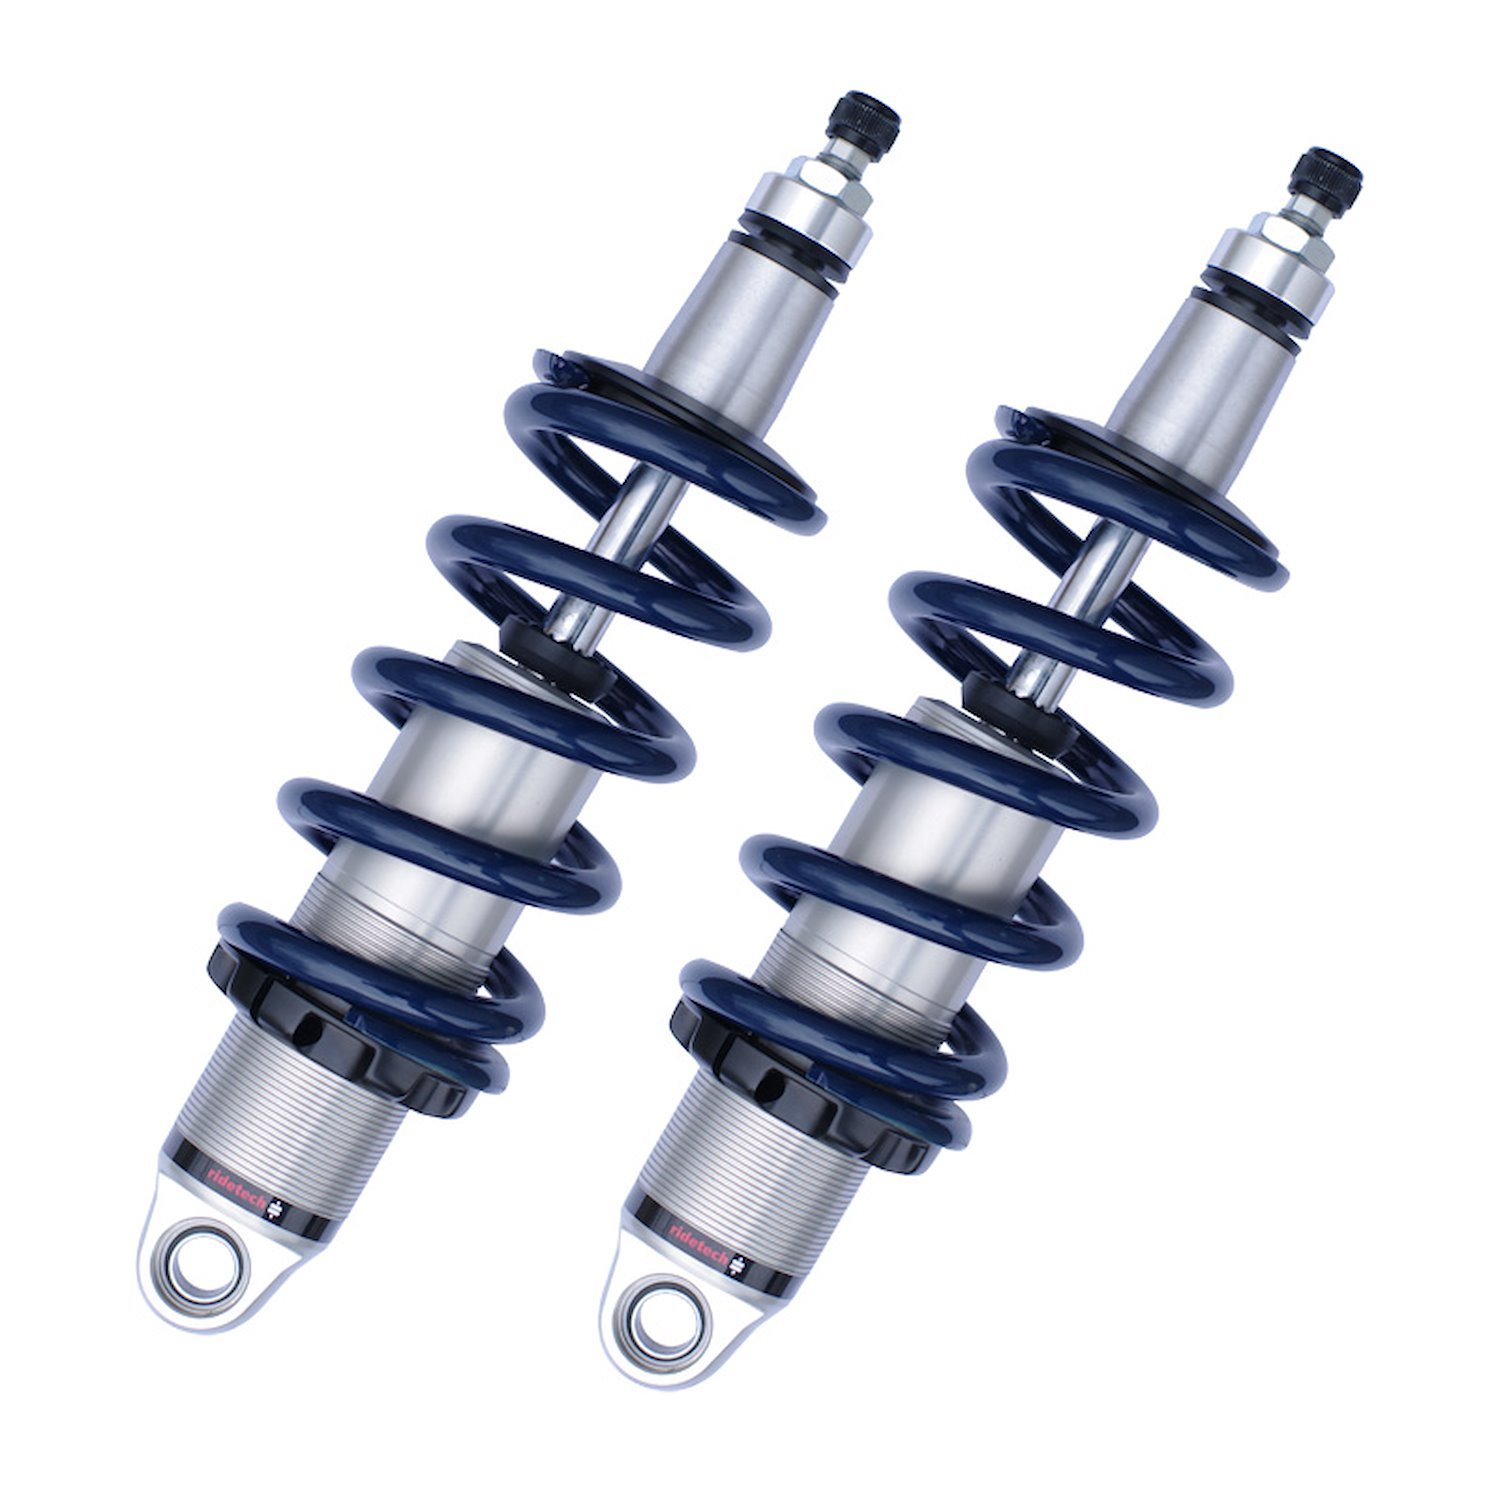 HQ Series front CoilOvers for 82-03 S-10. For